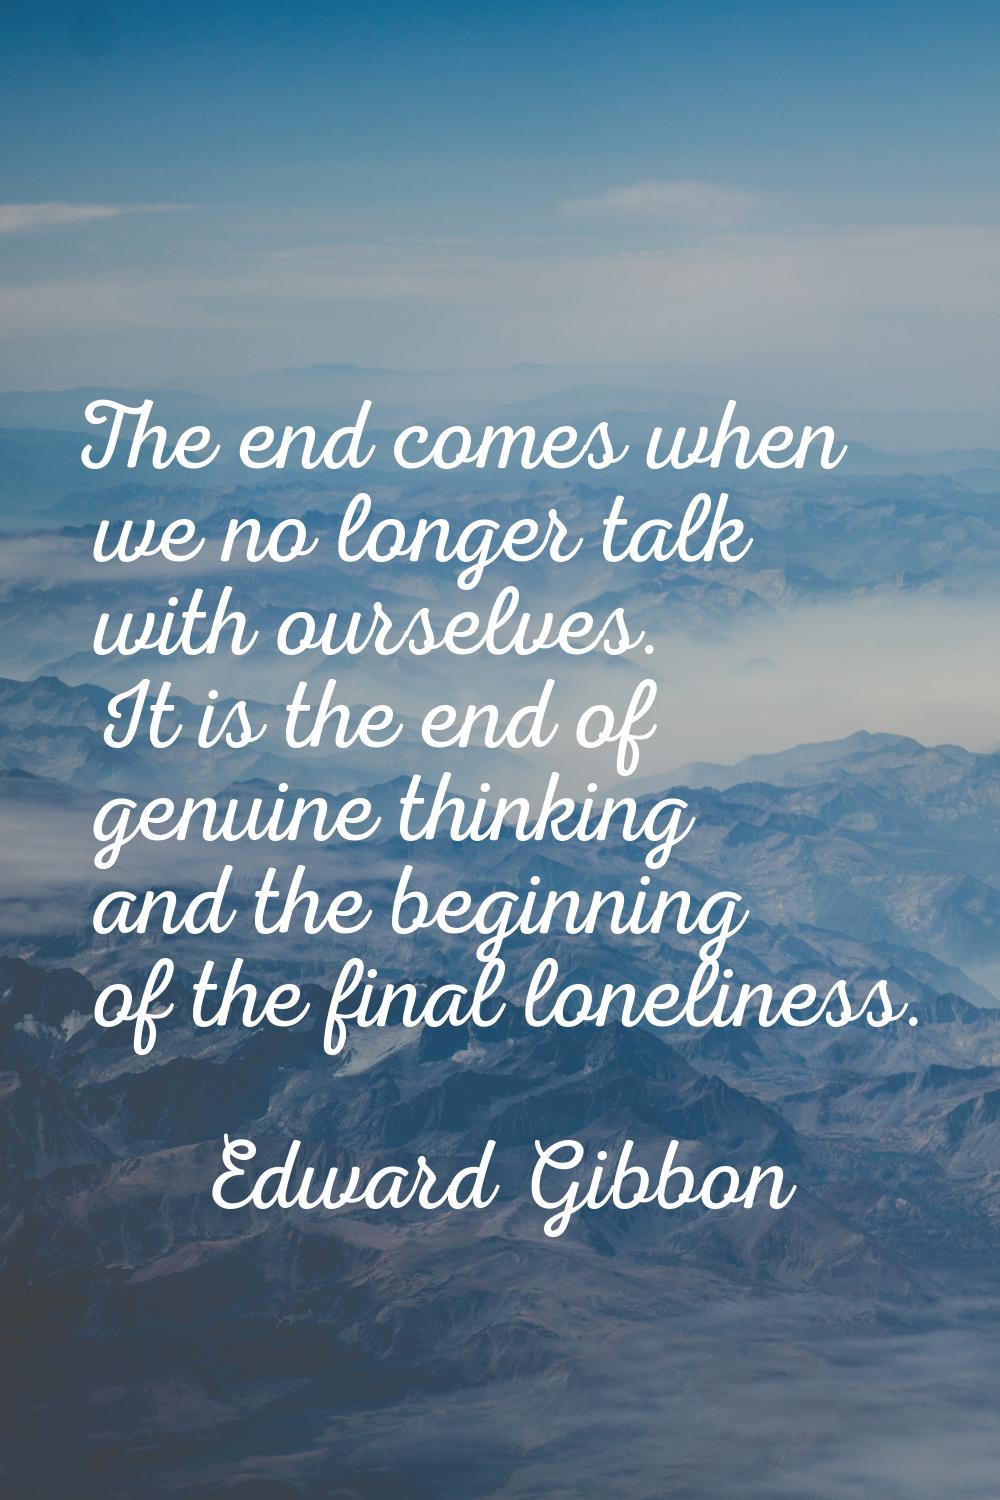 The end comes when we no longer talk with ourselves. It is the end of genuine thinking and the begi